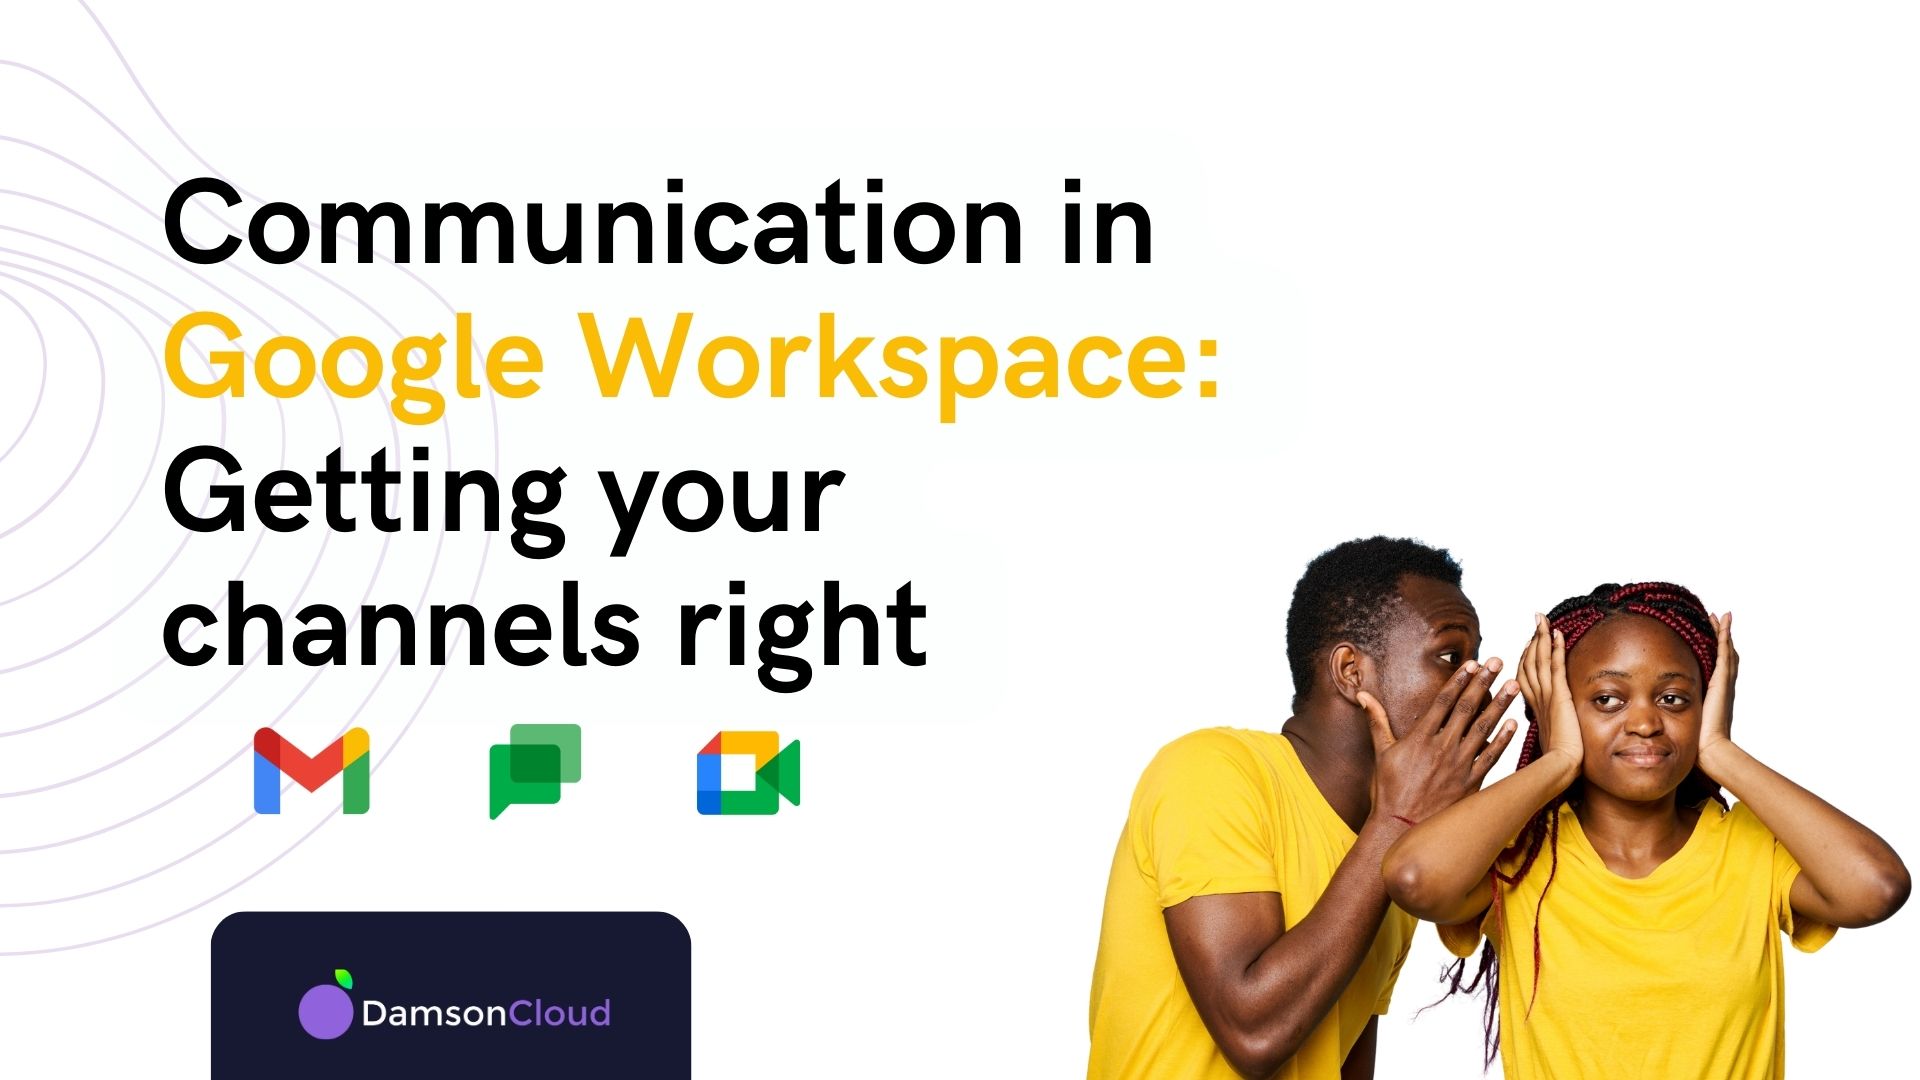 Communication in Google Workspace: Getting your channel right